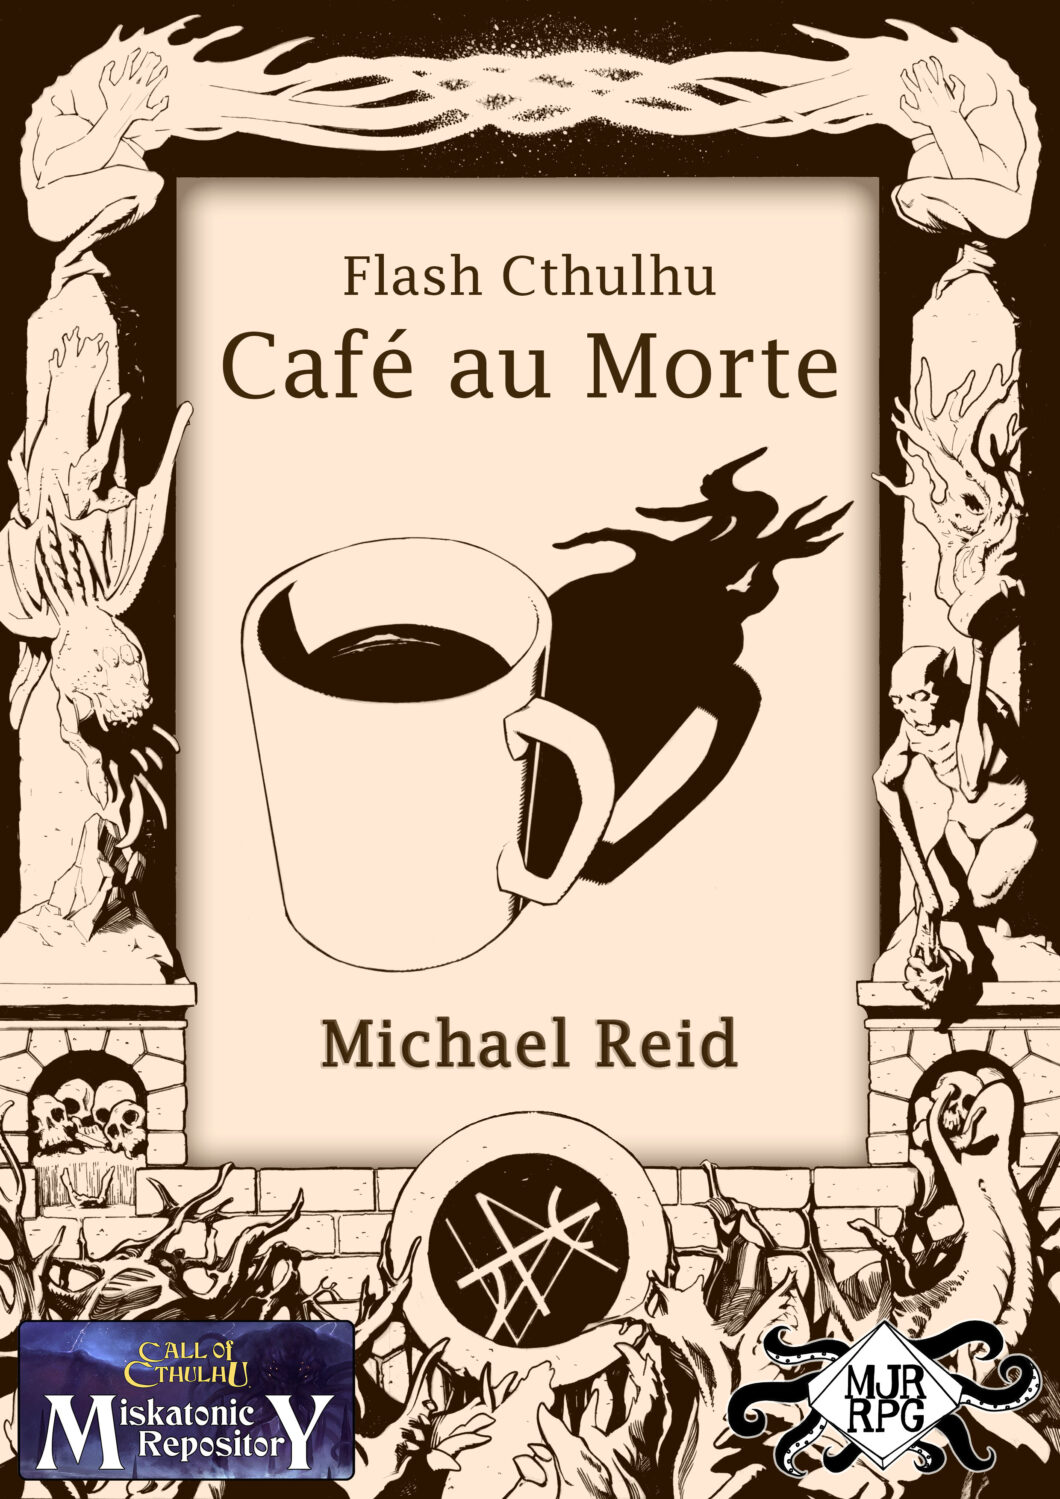 Call of Cthulhu Cafe au Morte Cover, Title with coffee cup with tentacle shadows